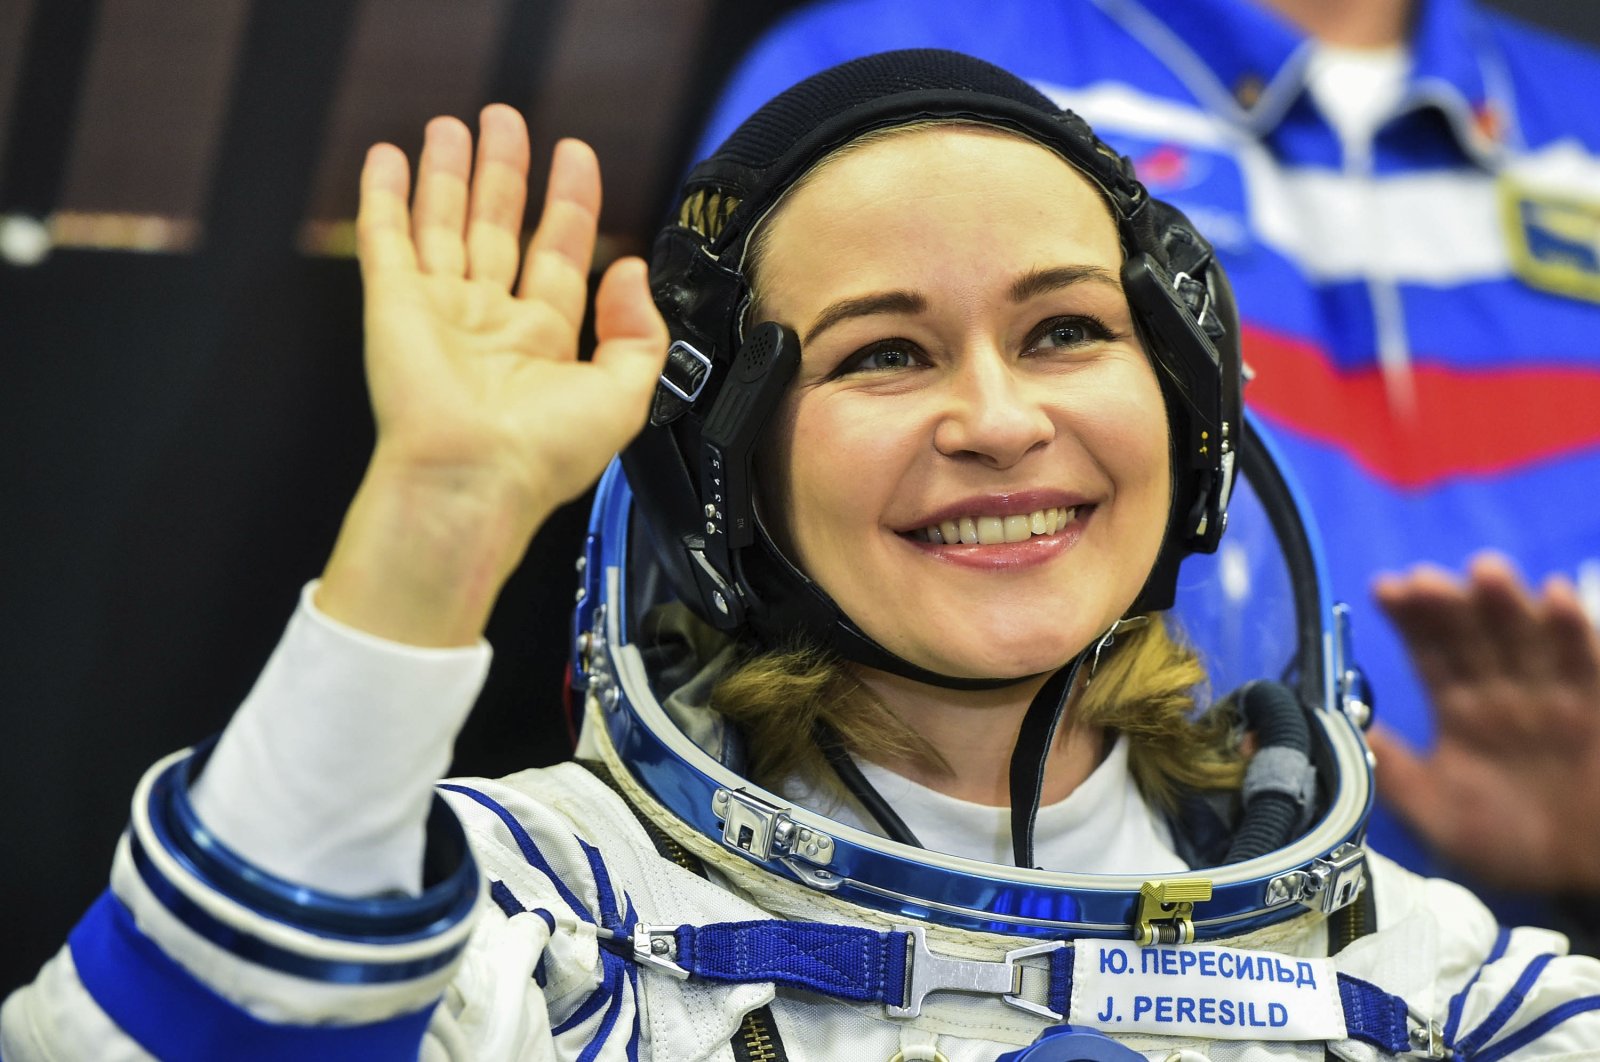 Actress Yulia Peresild waves prior to her launch to the International Space Station (ISS) at the Russian leased Baikonur cosmodrome, Kazakhstan, Oct. 5, 2021. (Roscosmos Space Agency via AP)